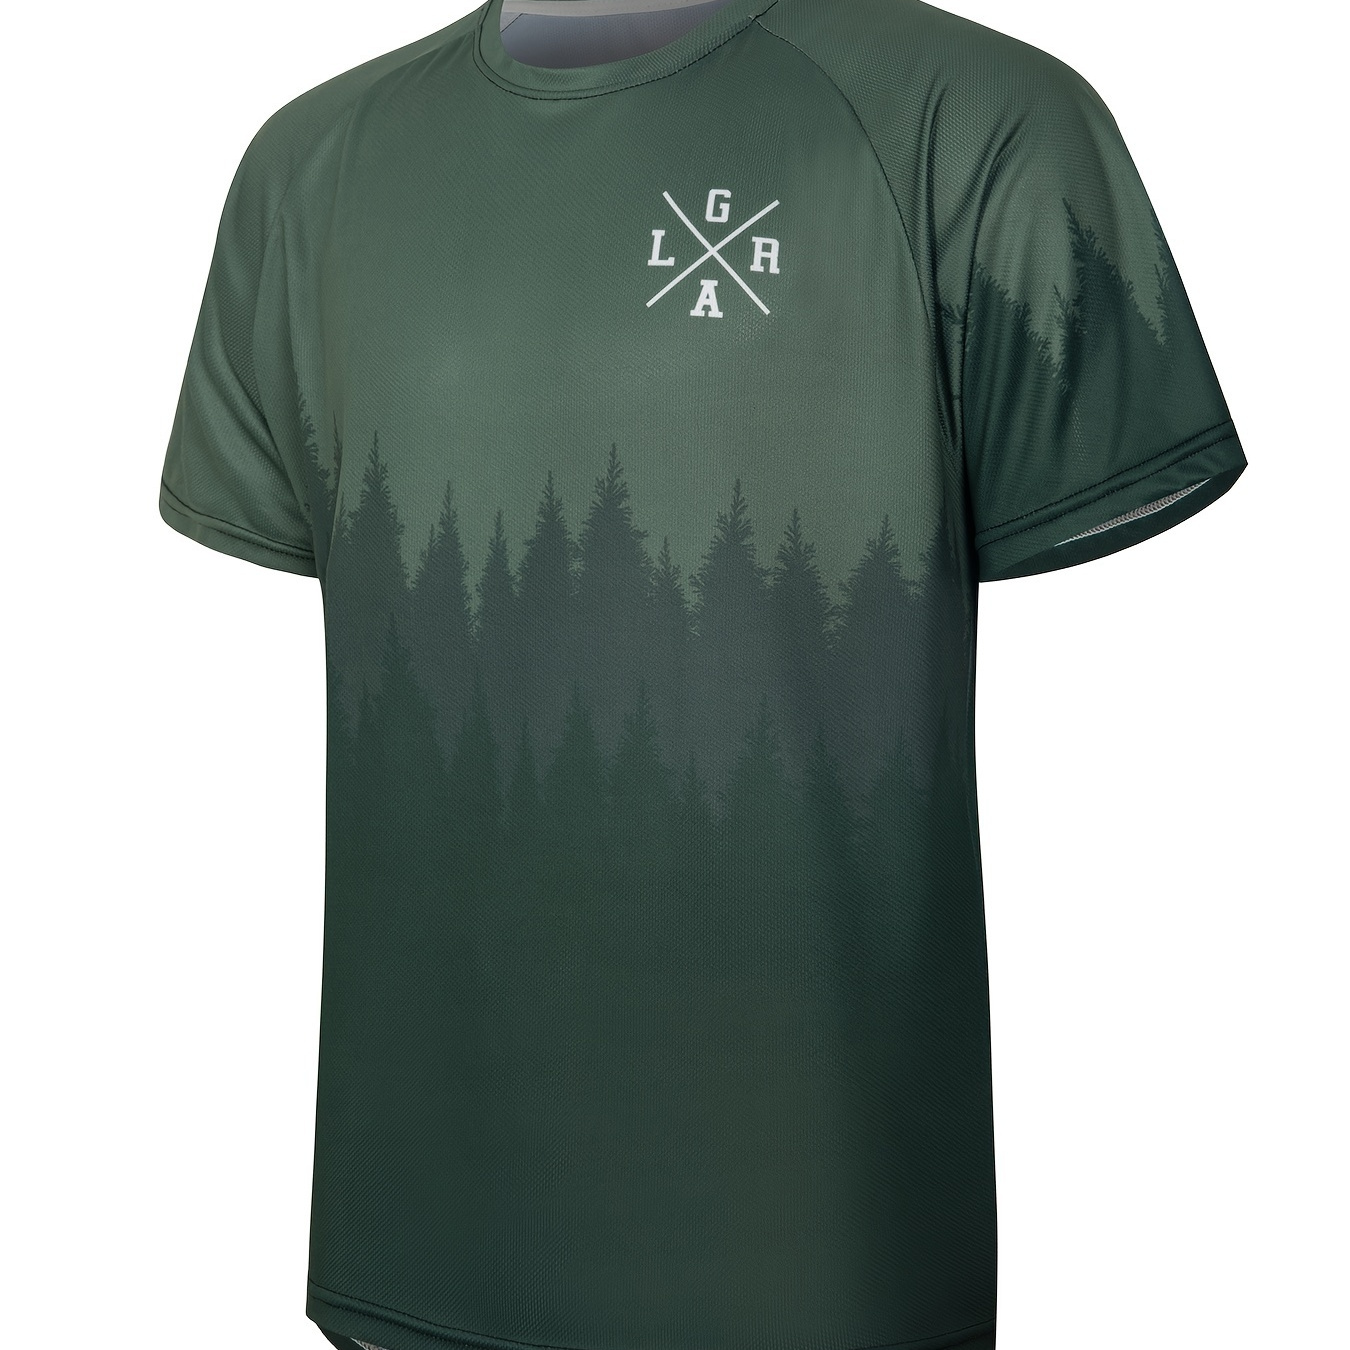 

Men's Trees Graphic Print Short Sleeve T-shirt For Sports Outdoor, Breathable Quick Dry Tees